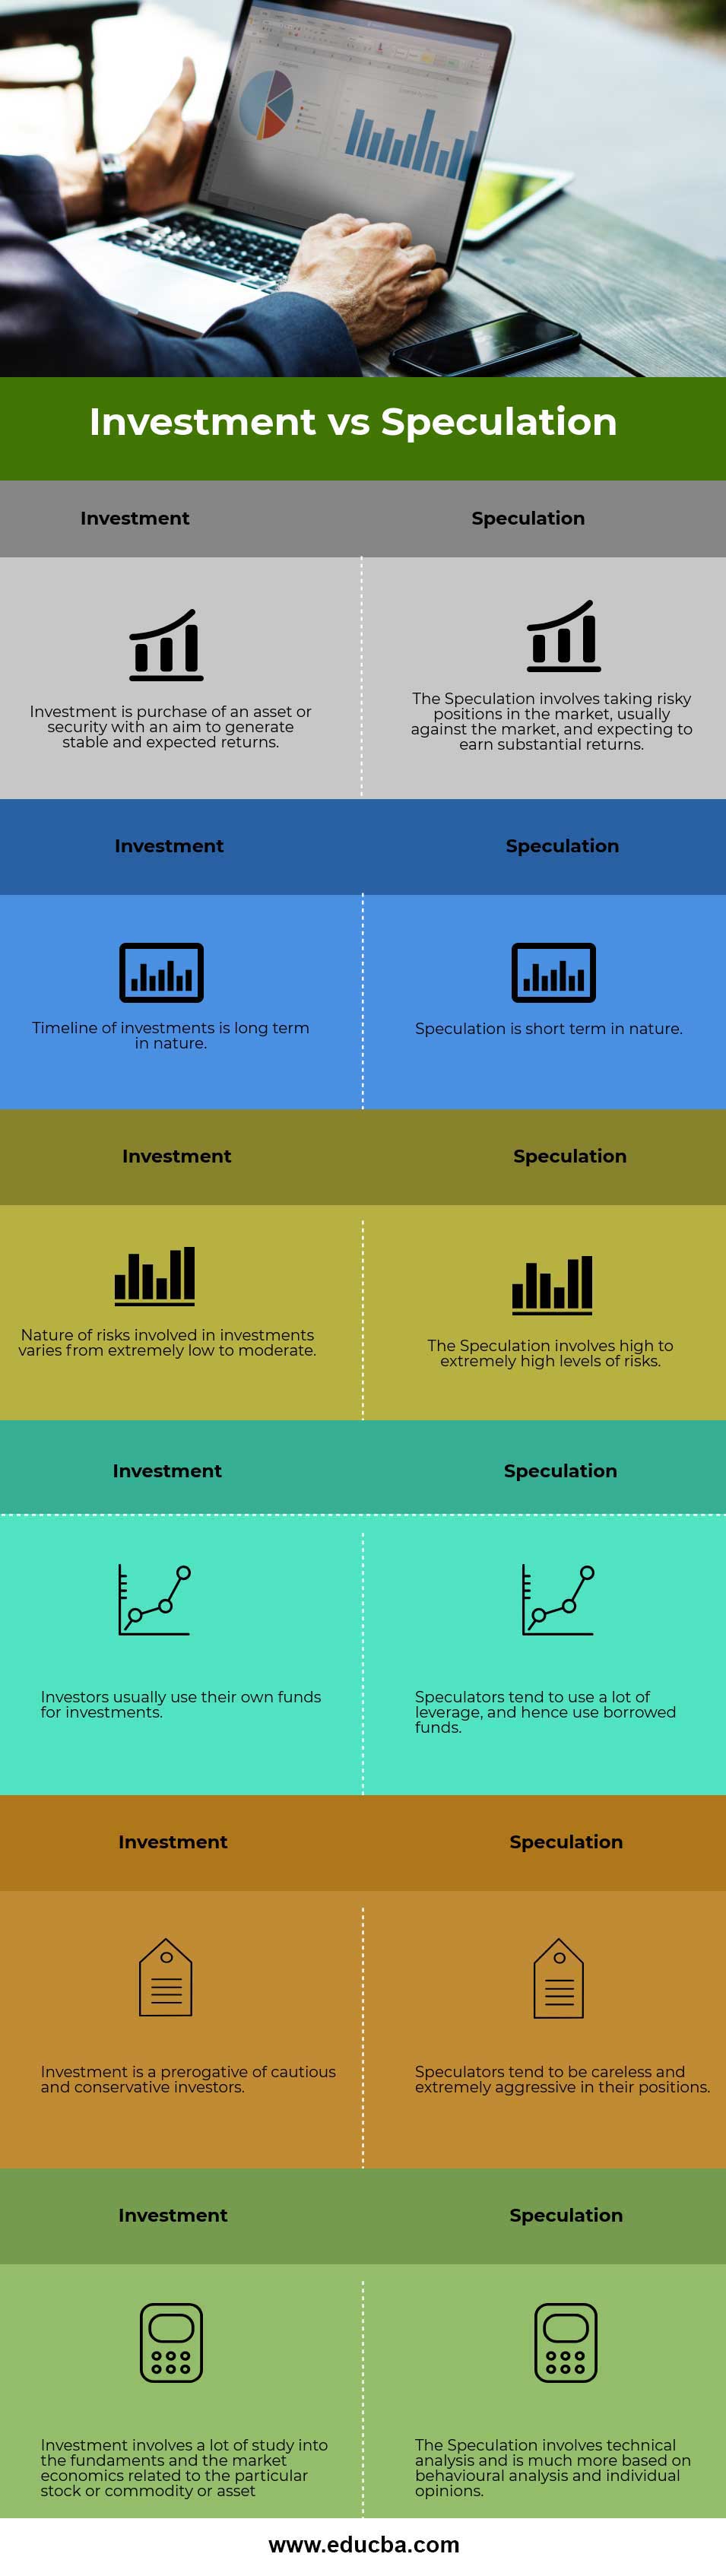 Investment vs Speculation info